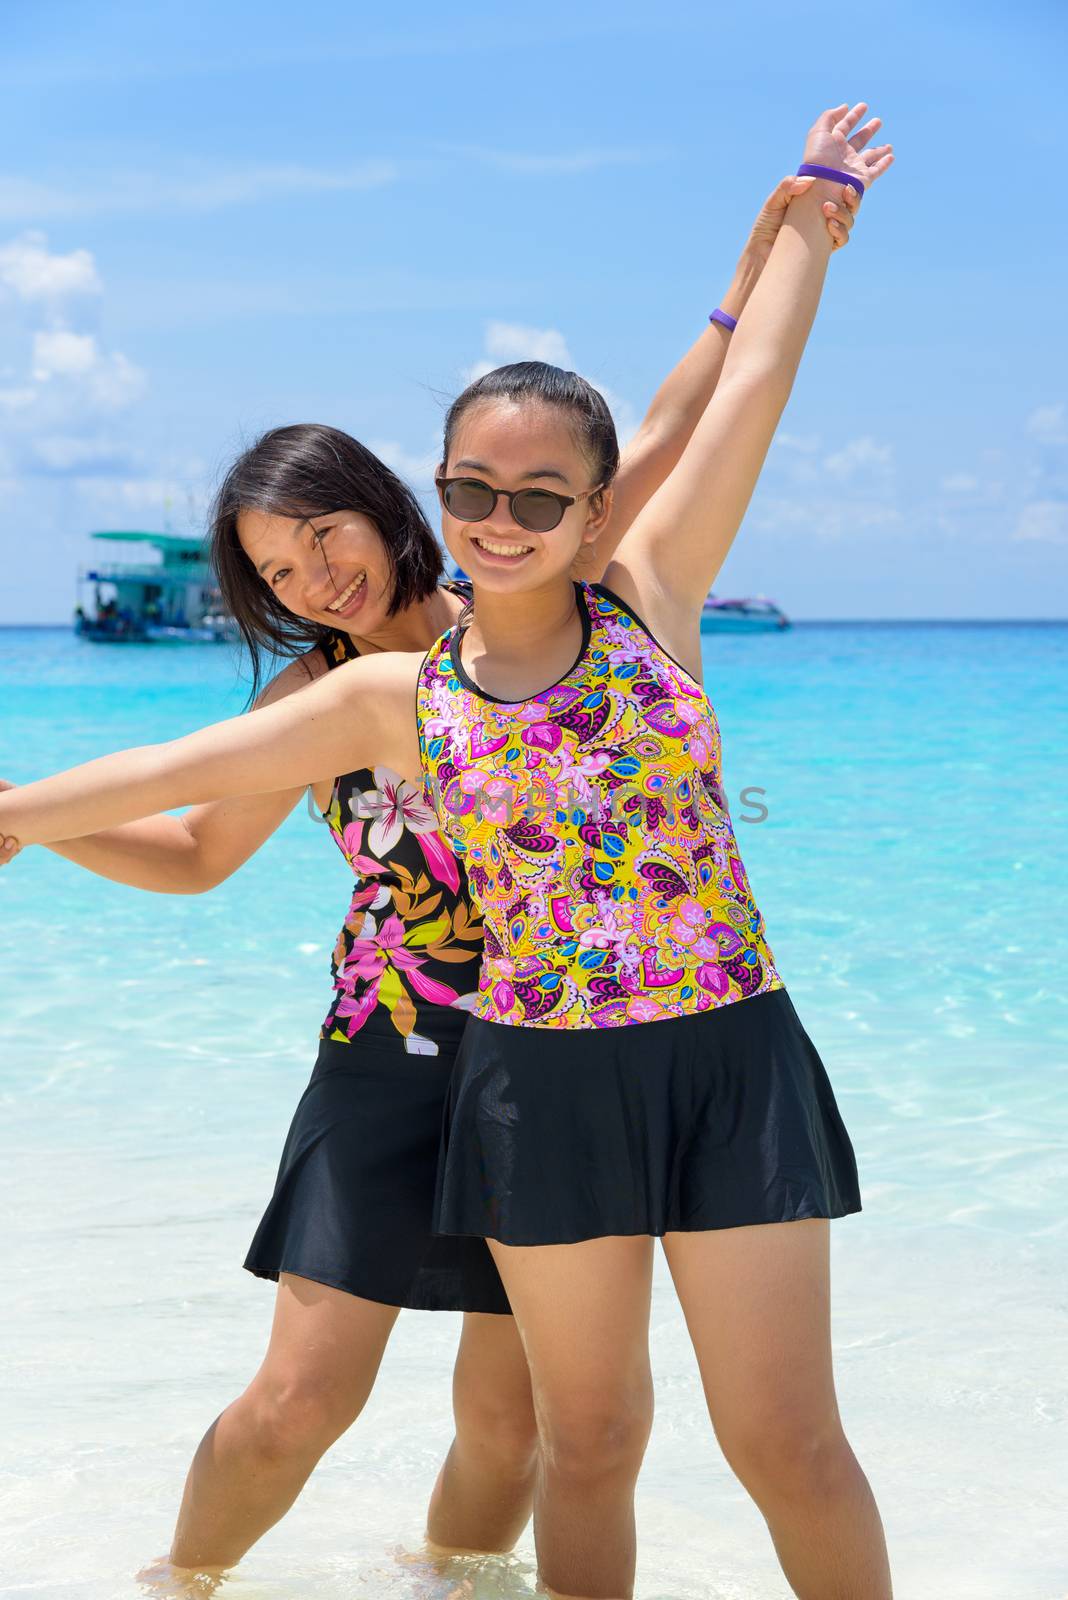 Mother and daughter on the beach at Similan islands, Thailand by Yongkiet